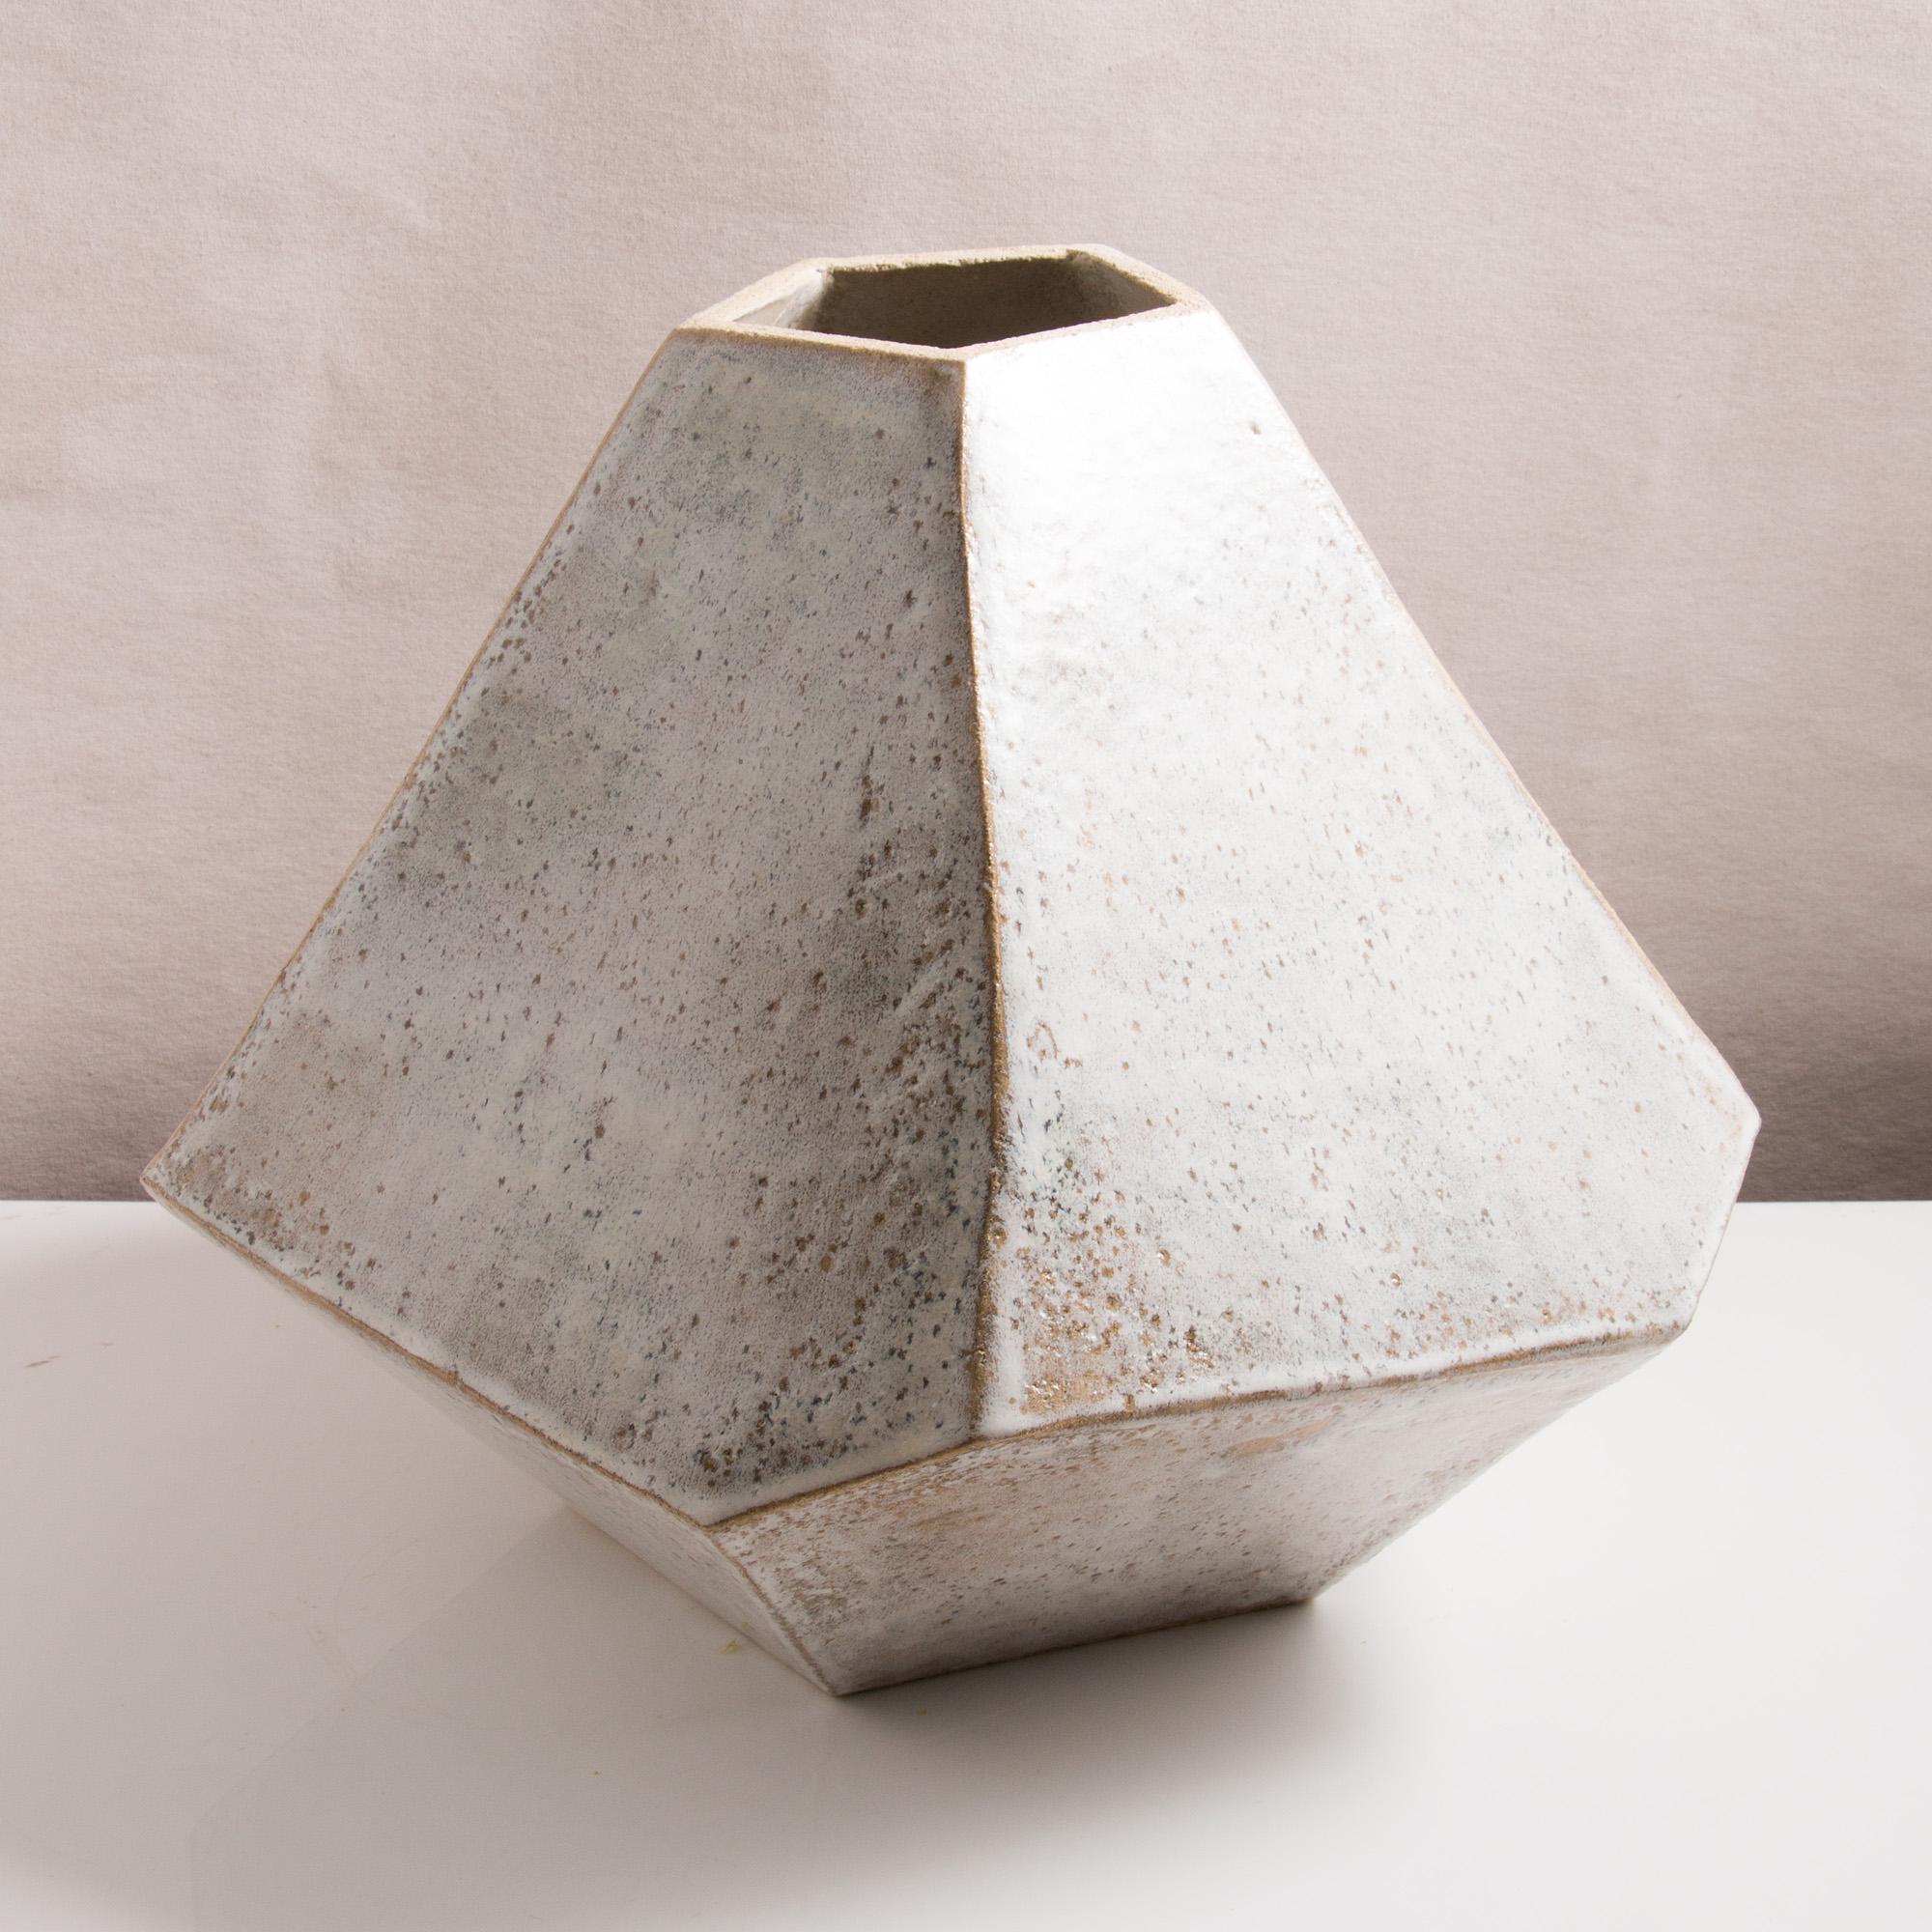 This large one-of-a-kind ceramic vase combines complex geometric lines with the warmth and individuality inherent in handmade work. It was assembled from flat sheets of a sandy stoneware, into a geometric shape that feels both natural and entirely